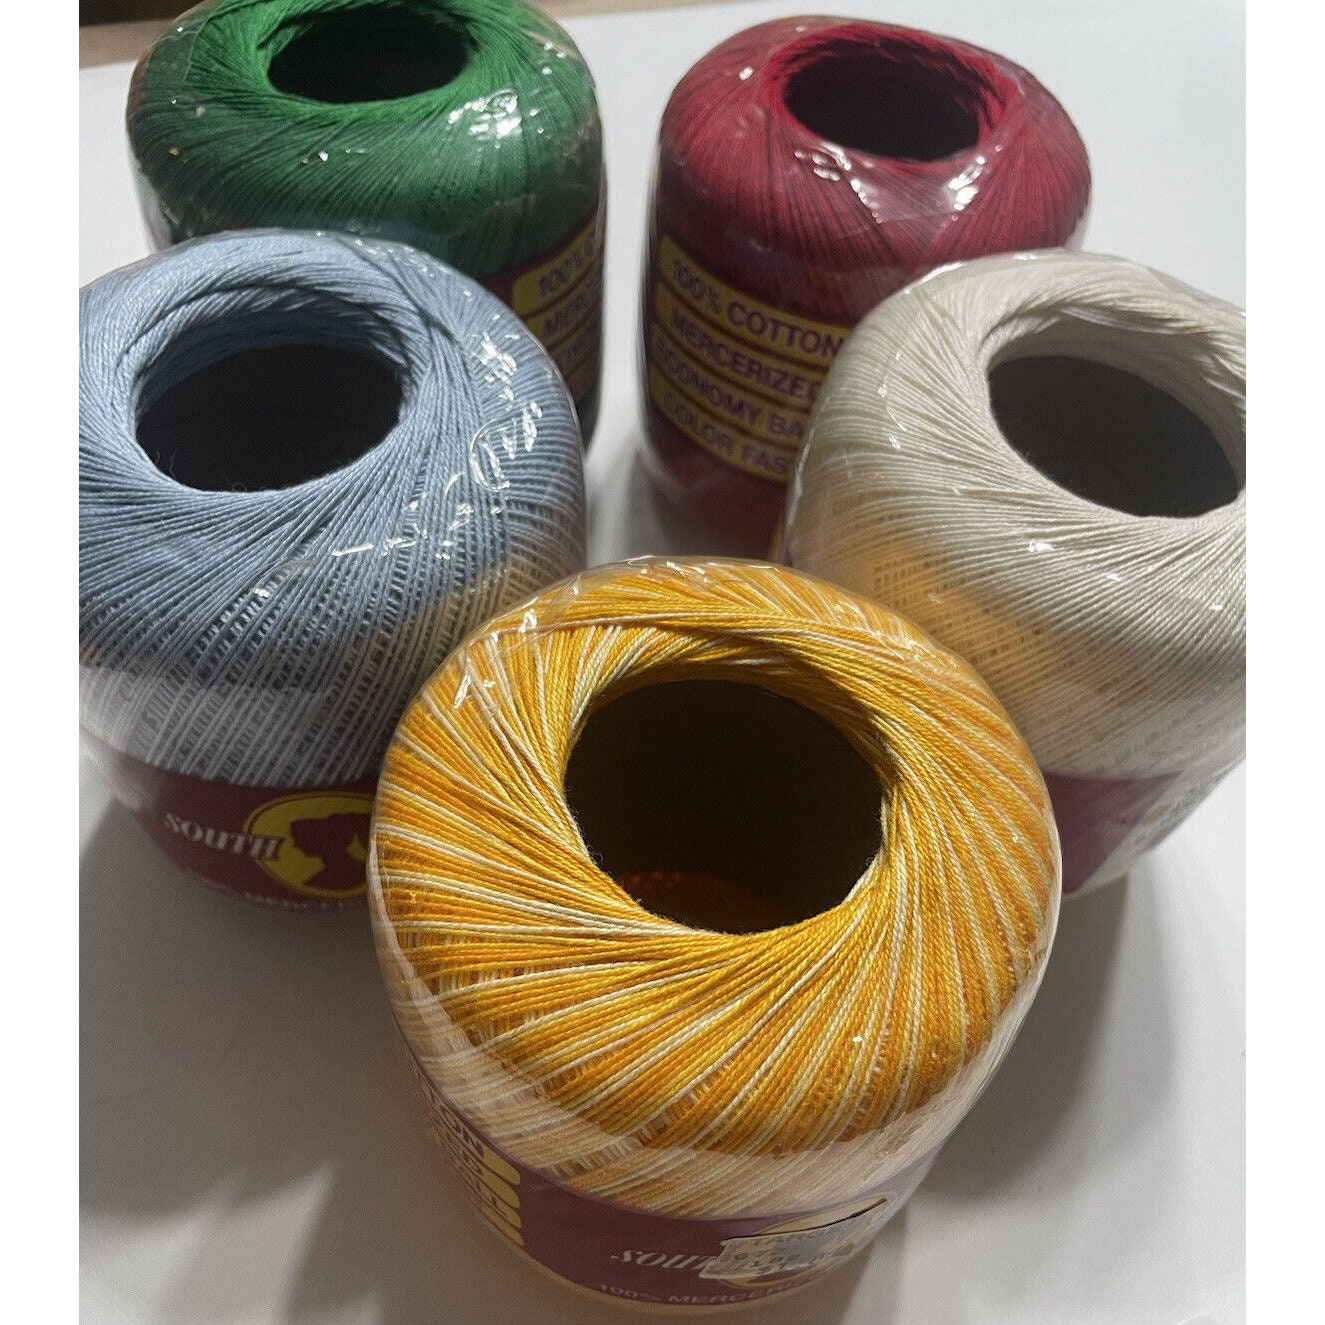 South Maid Cotton Mercerized Color WHITE 350 Yarn Crochet Lot Of 8